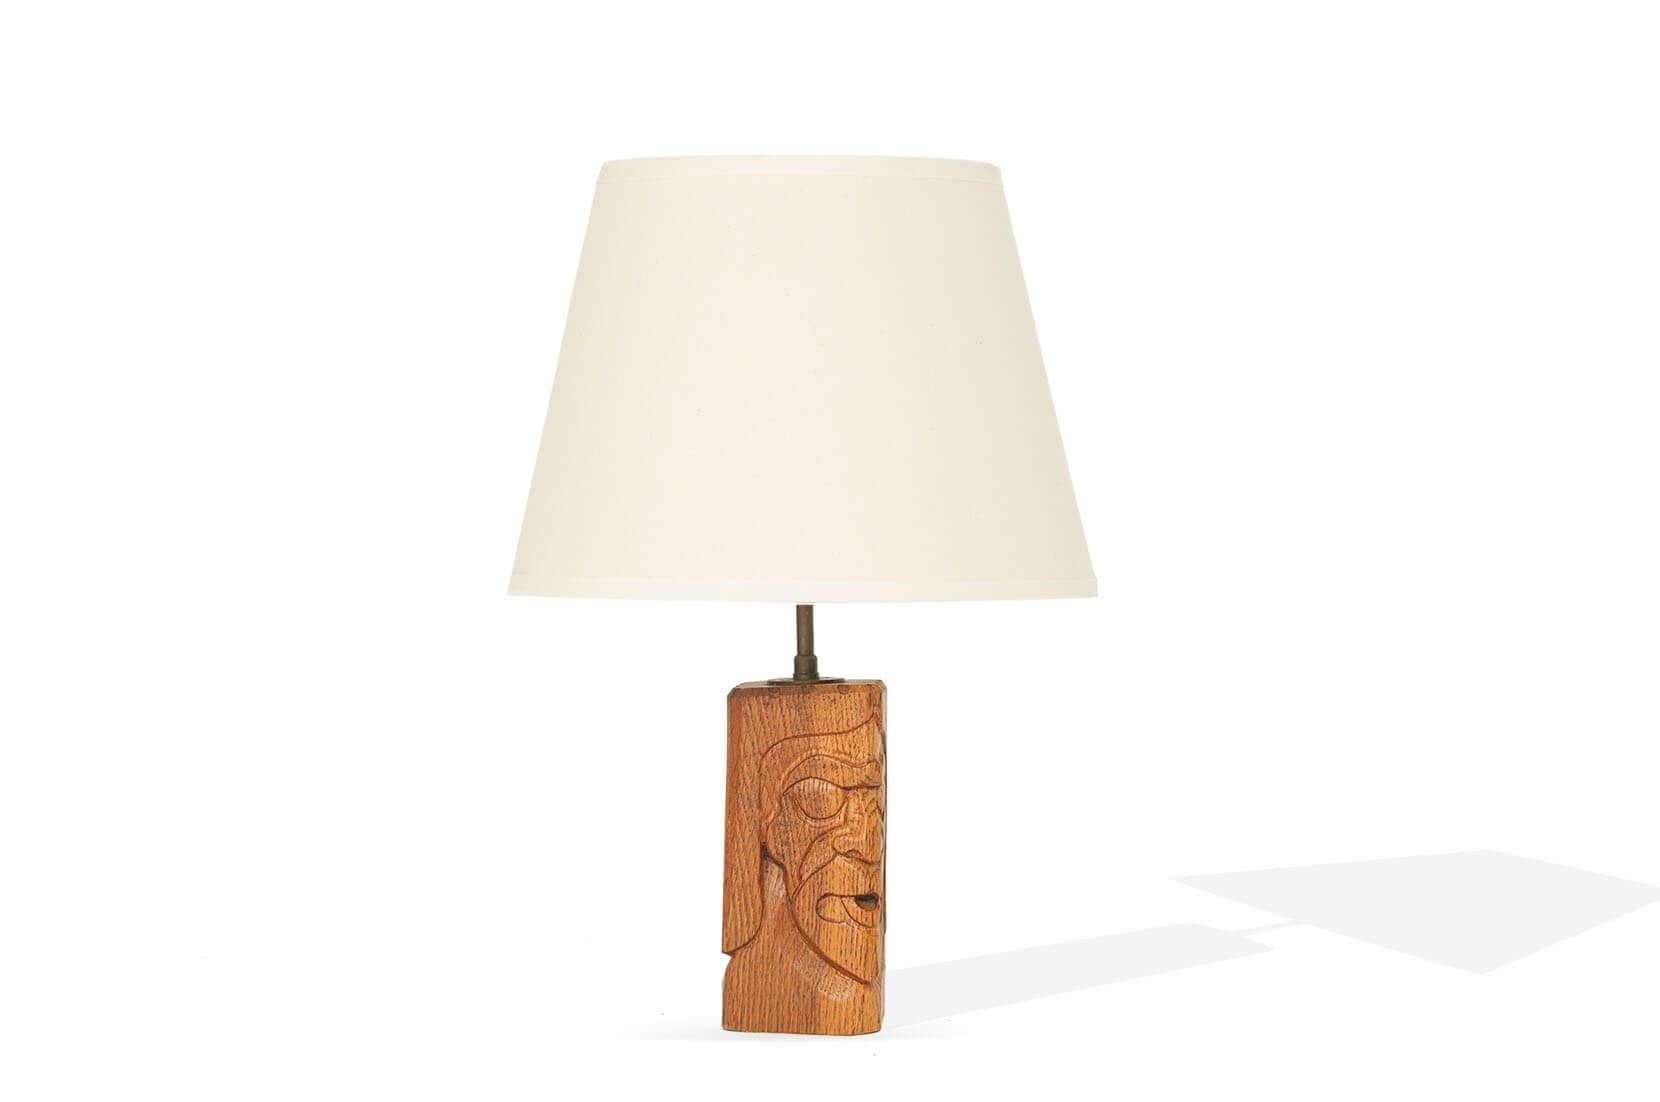 Mid-20th Century Table Lamp Carved in Wood, with White Shade and Brass Tube, Signed, France 1950